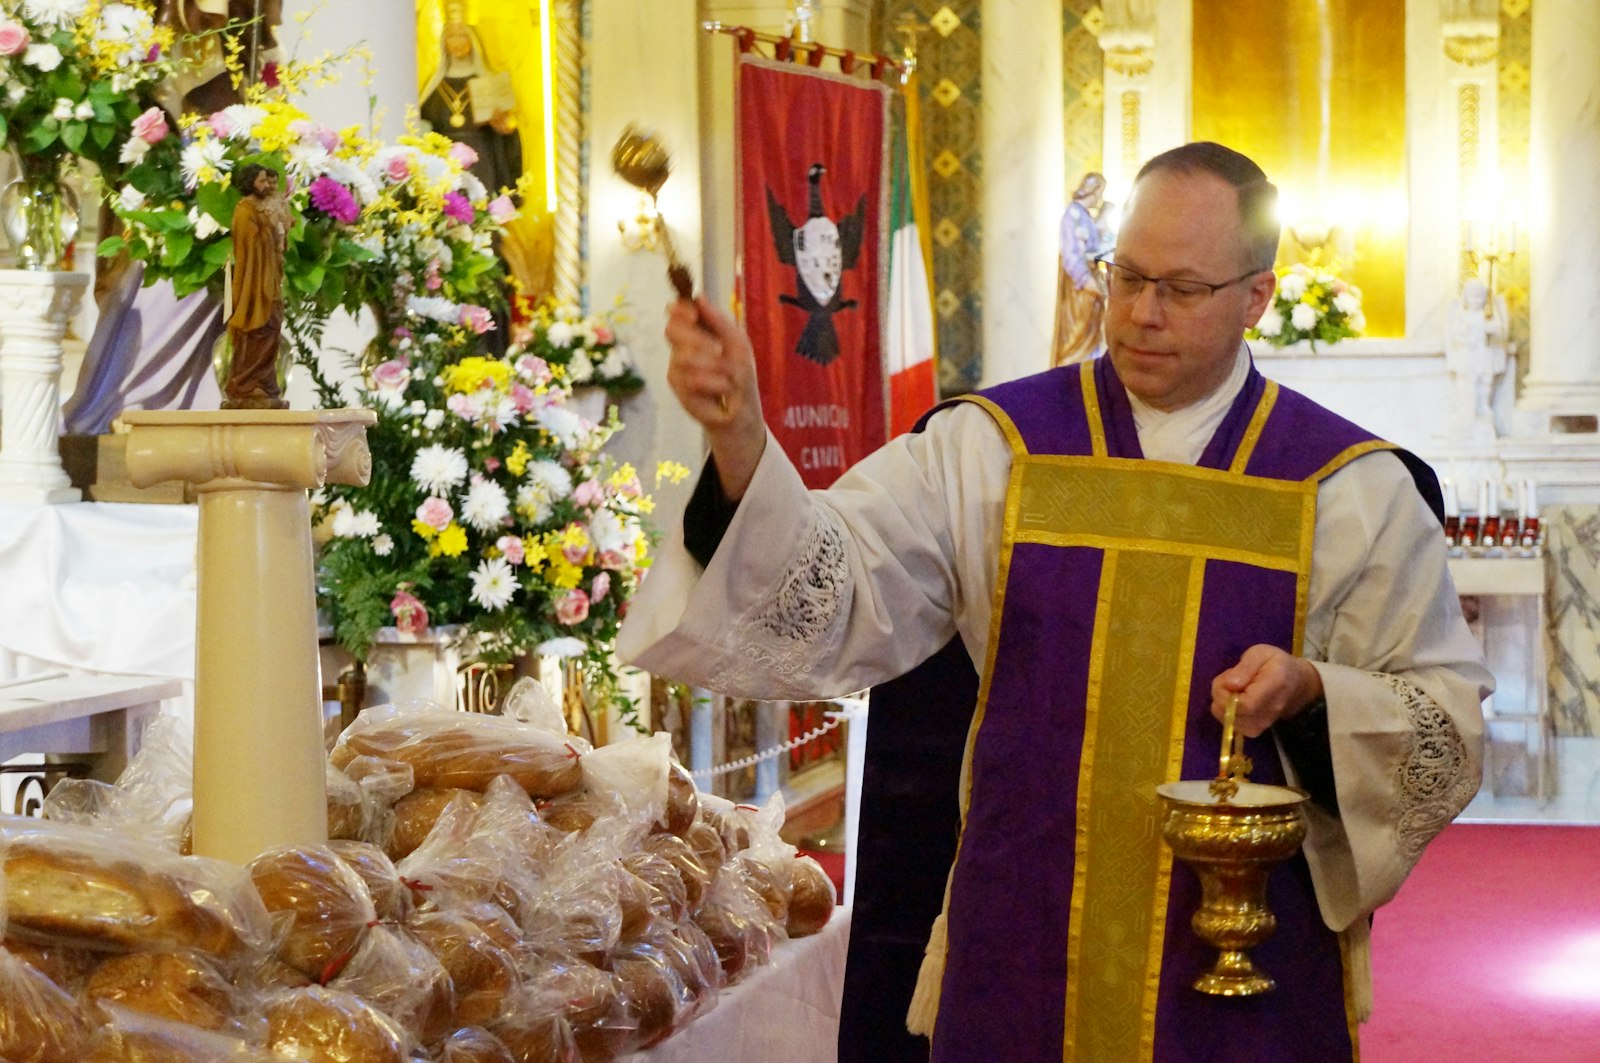 Fr. Paul Ward, pastor of Holy Family Parish in Detroit, blesses St. Joseph's Day bread after Mass on March 20. The parish was founded in 1909 by Italian immigrants, many of whom came to the United States with their own traditions, including special celebrations in honor of St. Joseph.